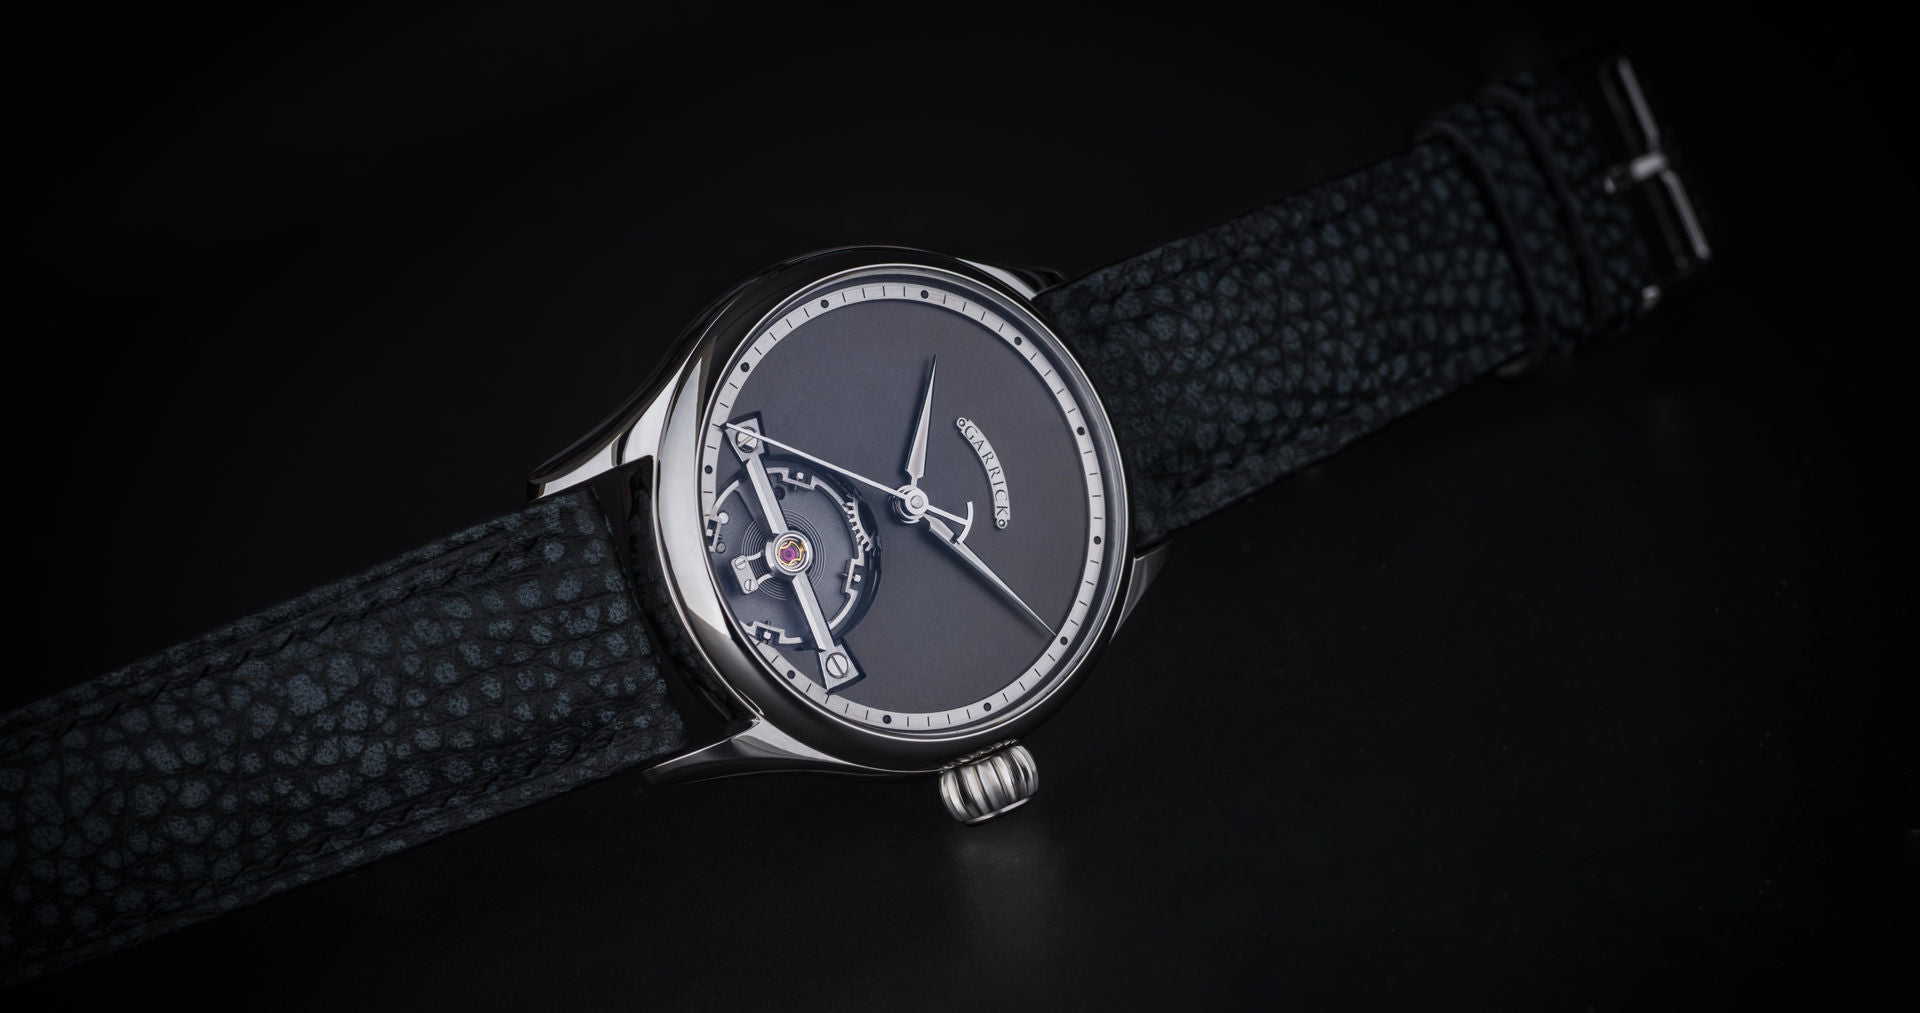 Handmade British made S2 watch with in-house movement by Garrick watchmakers